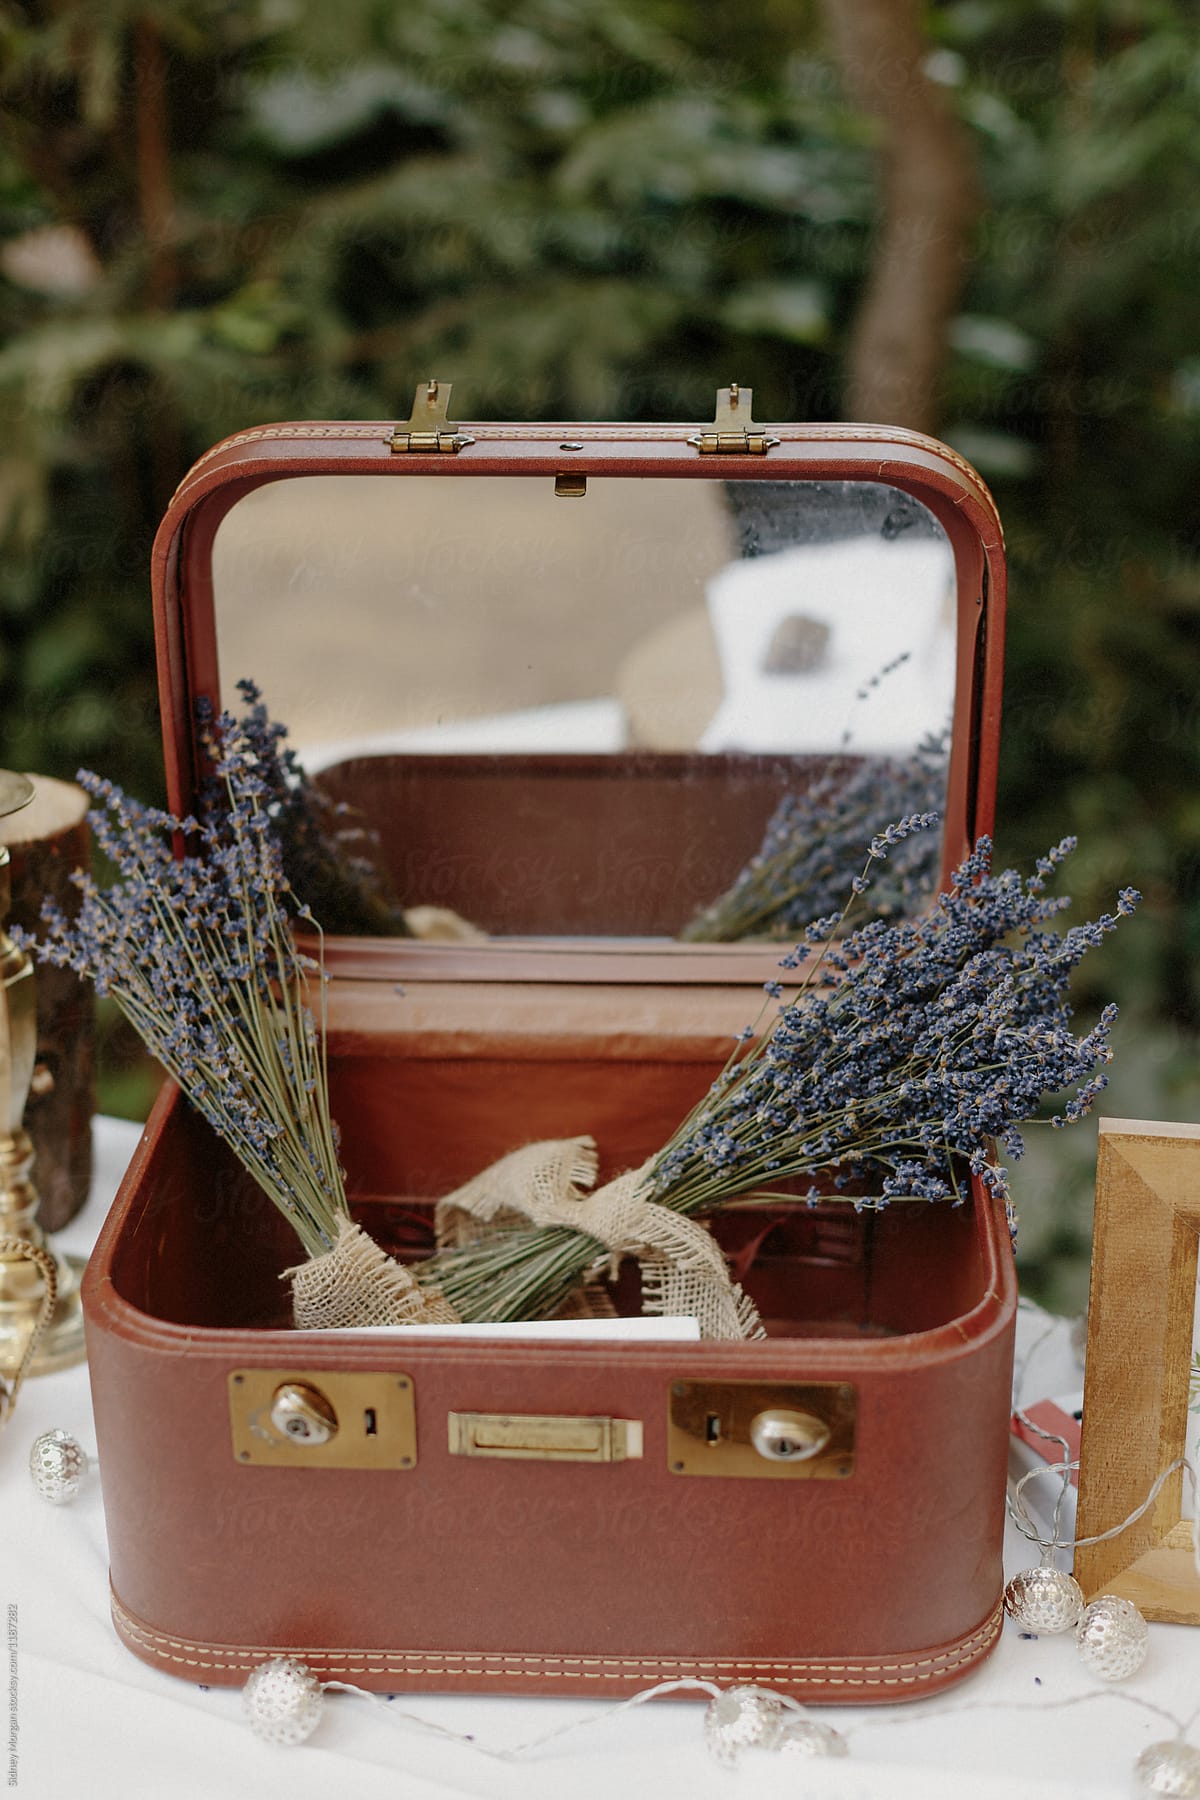 Lavender in Small Suitcase